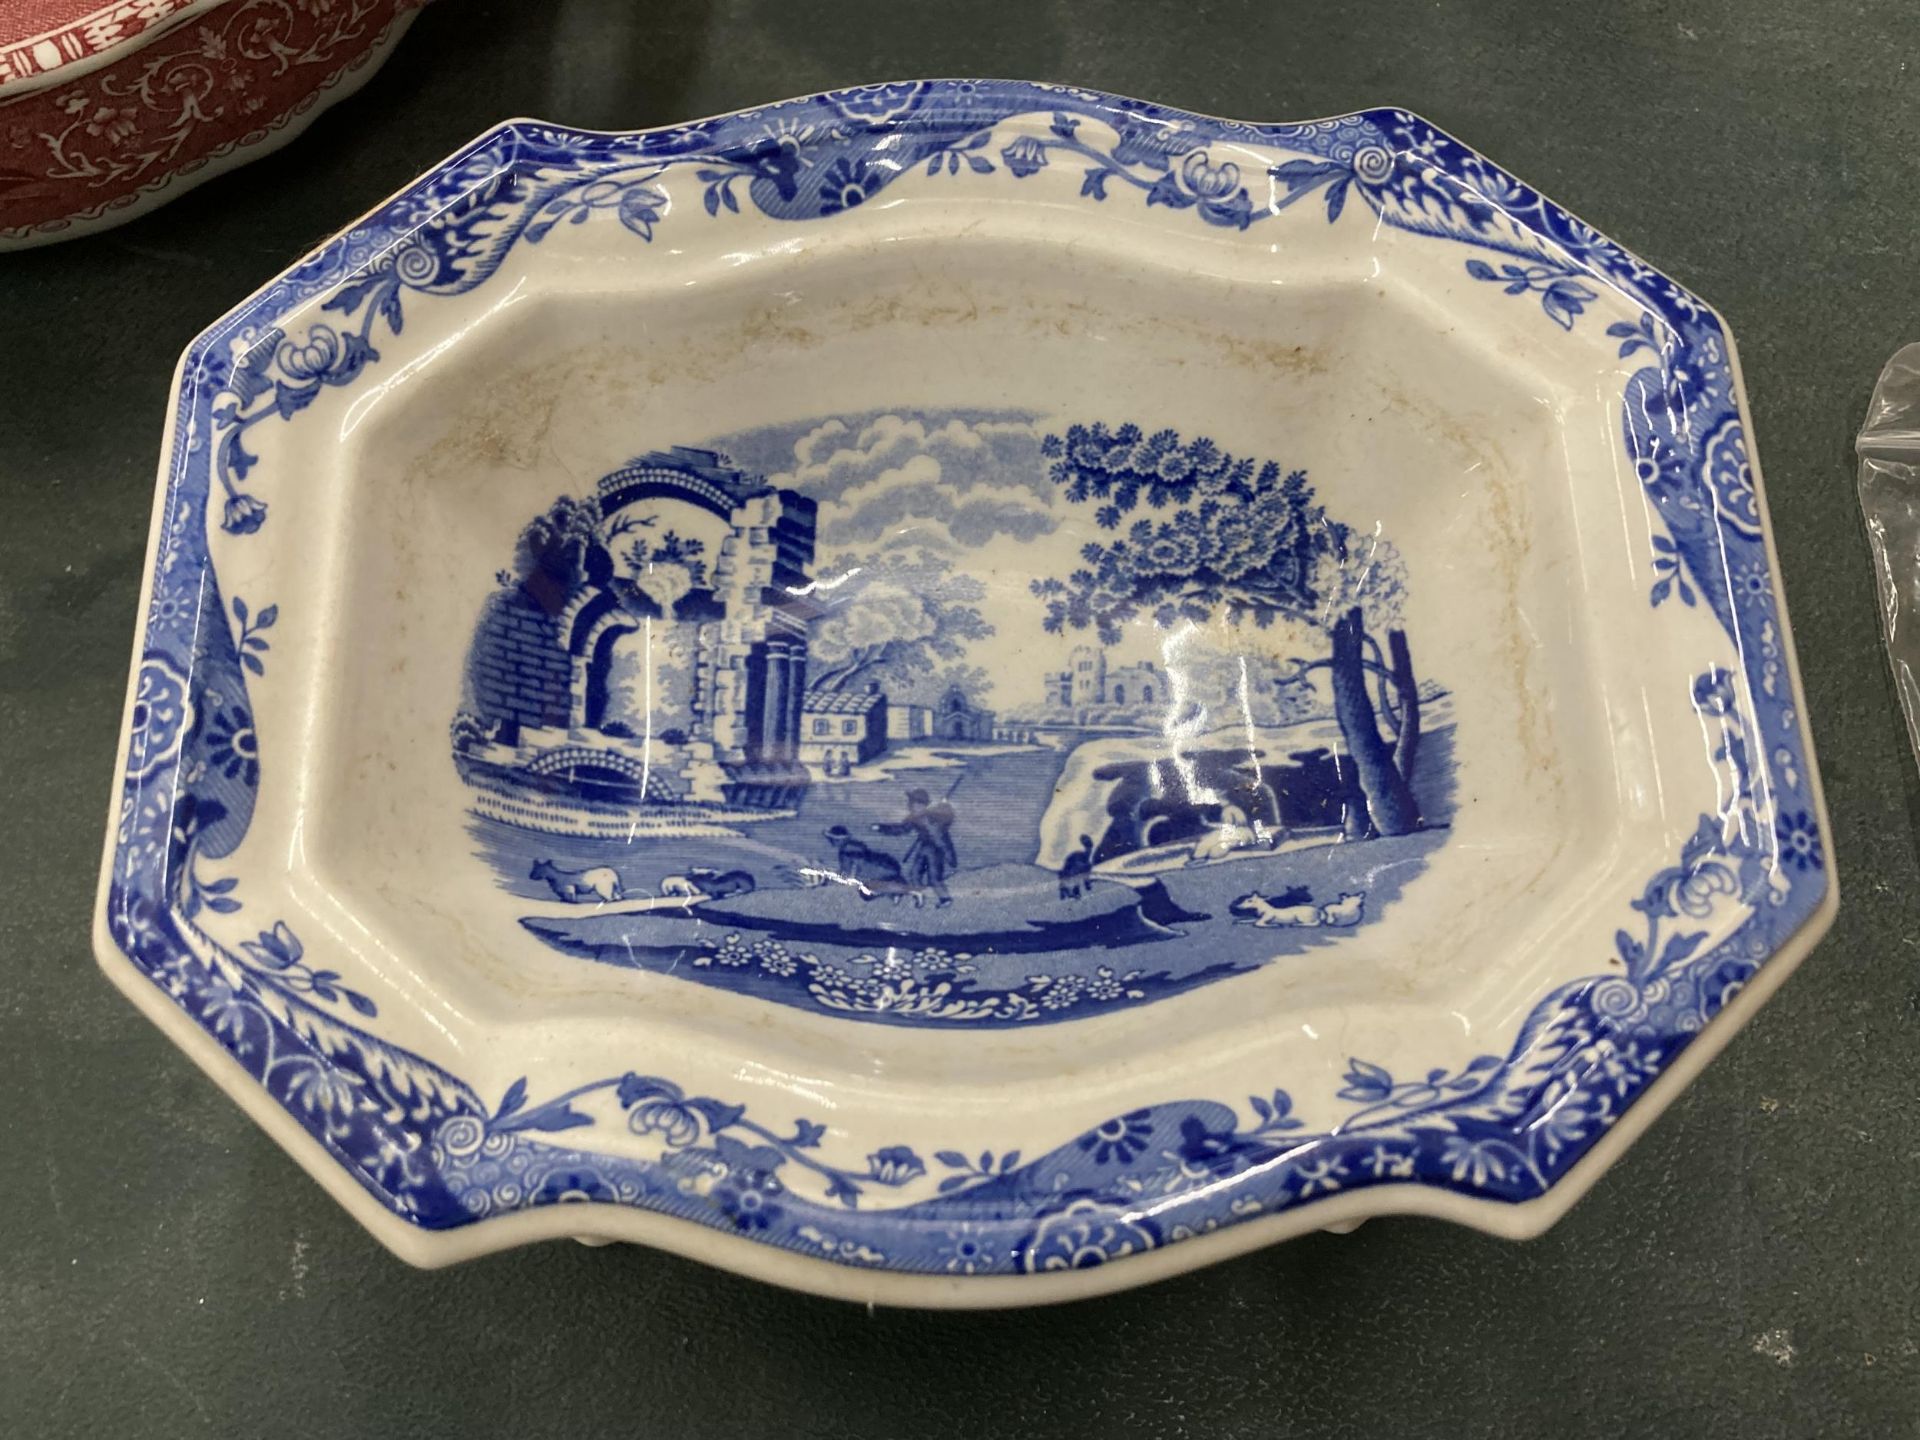 A 2003 SPODE, THE SIGNATURE COLLECTION, ITALIAN LIMITED EDITION, 97/750, BLUE AND WHITE DOG BOWL - Image 2 of 3